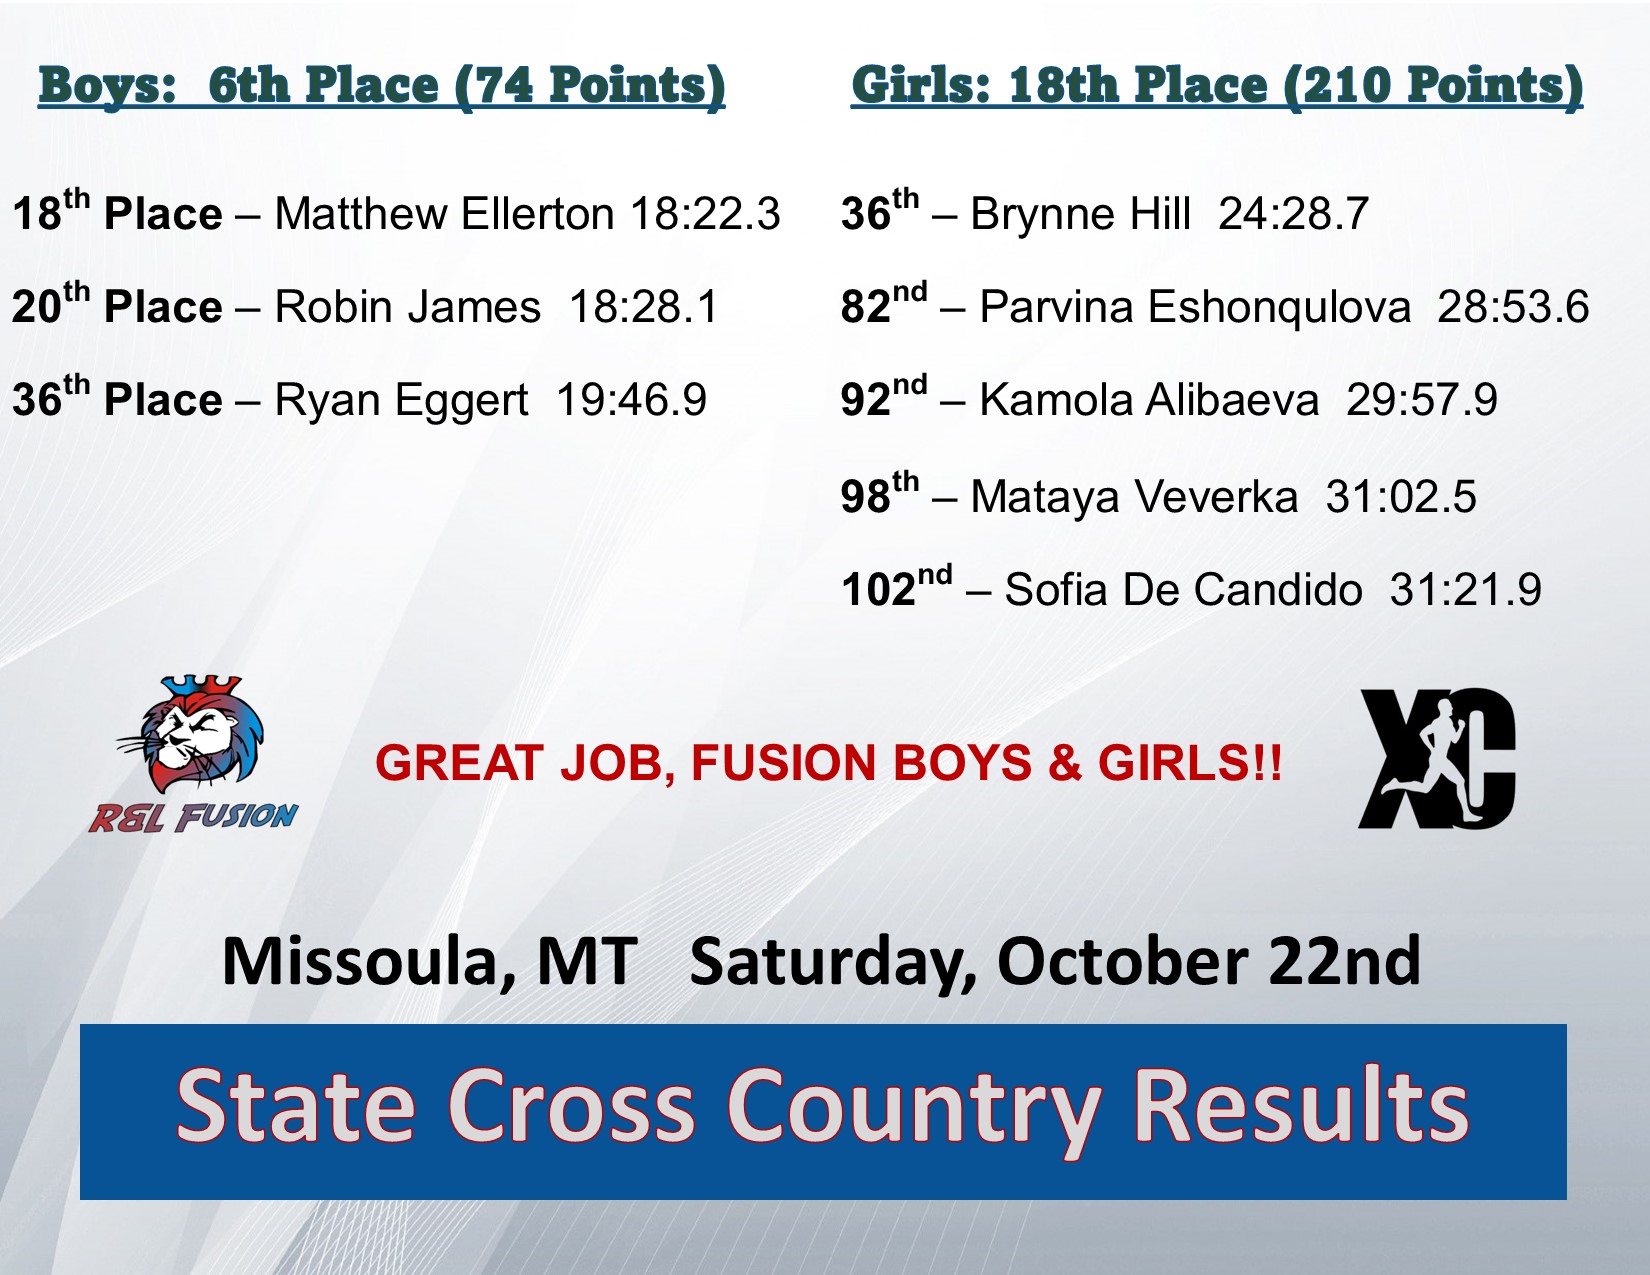 State Cross Country Results